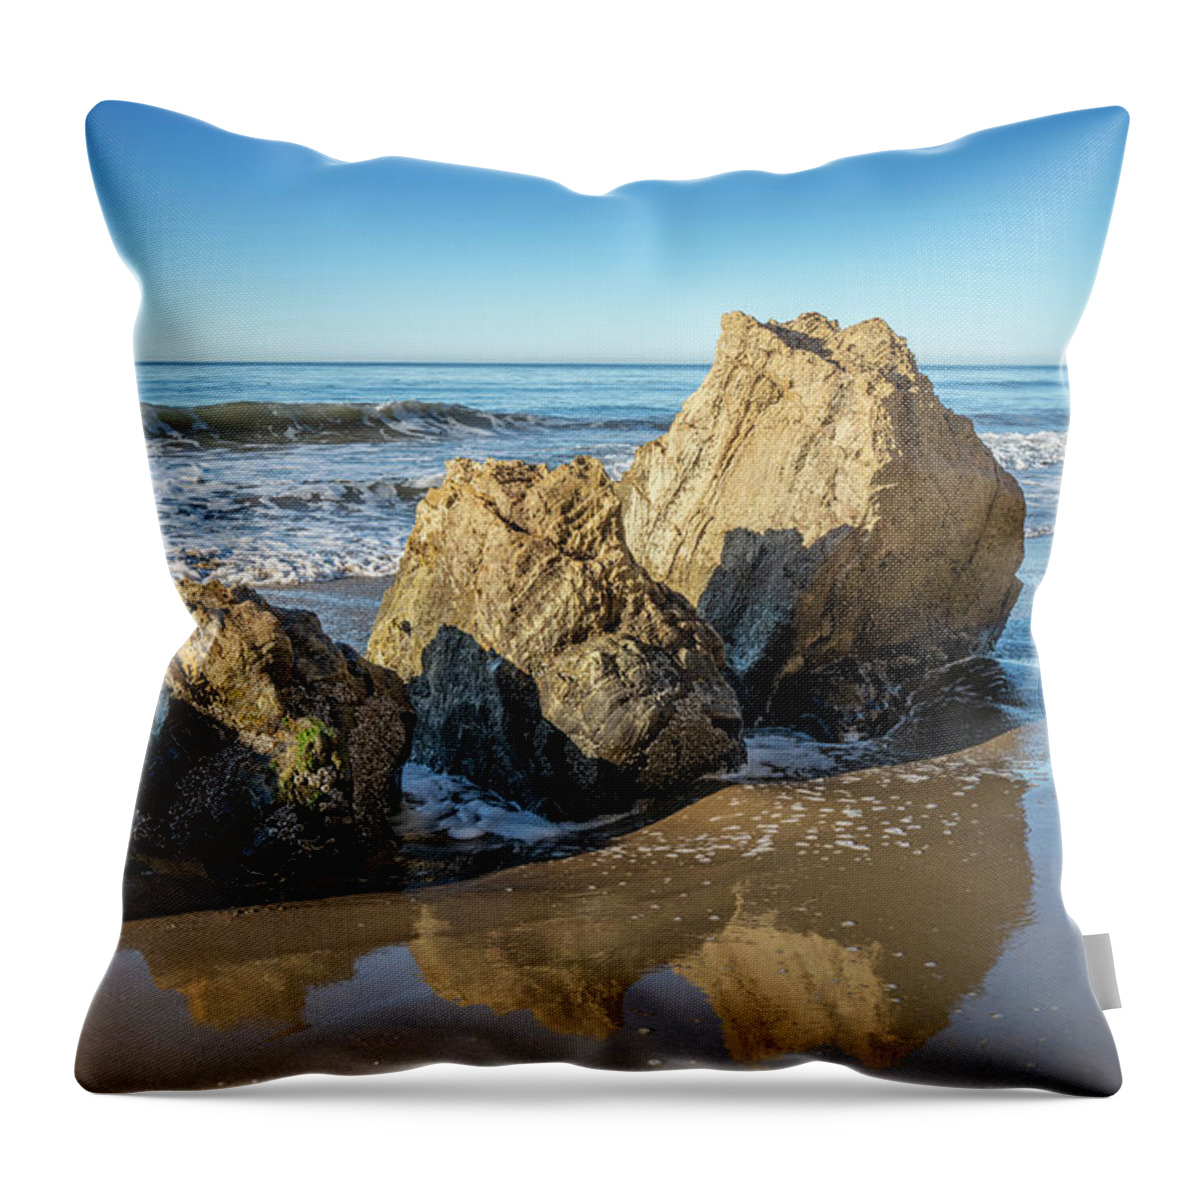 Santa Barbara Ca California Seascape Colorful Morning Light Ocean Shore Waves Surf Sand Rocks Striking Boulders Throw Pillow featuring the photograph Skinny Dippers SS by Perry Hambright